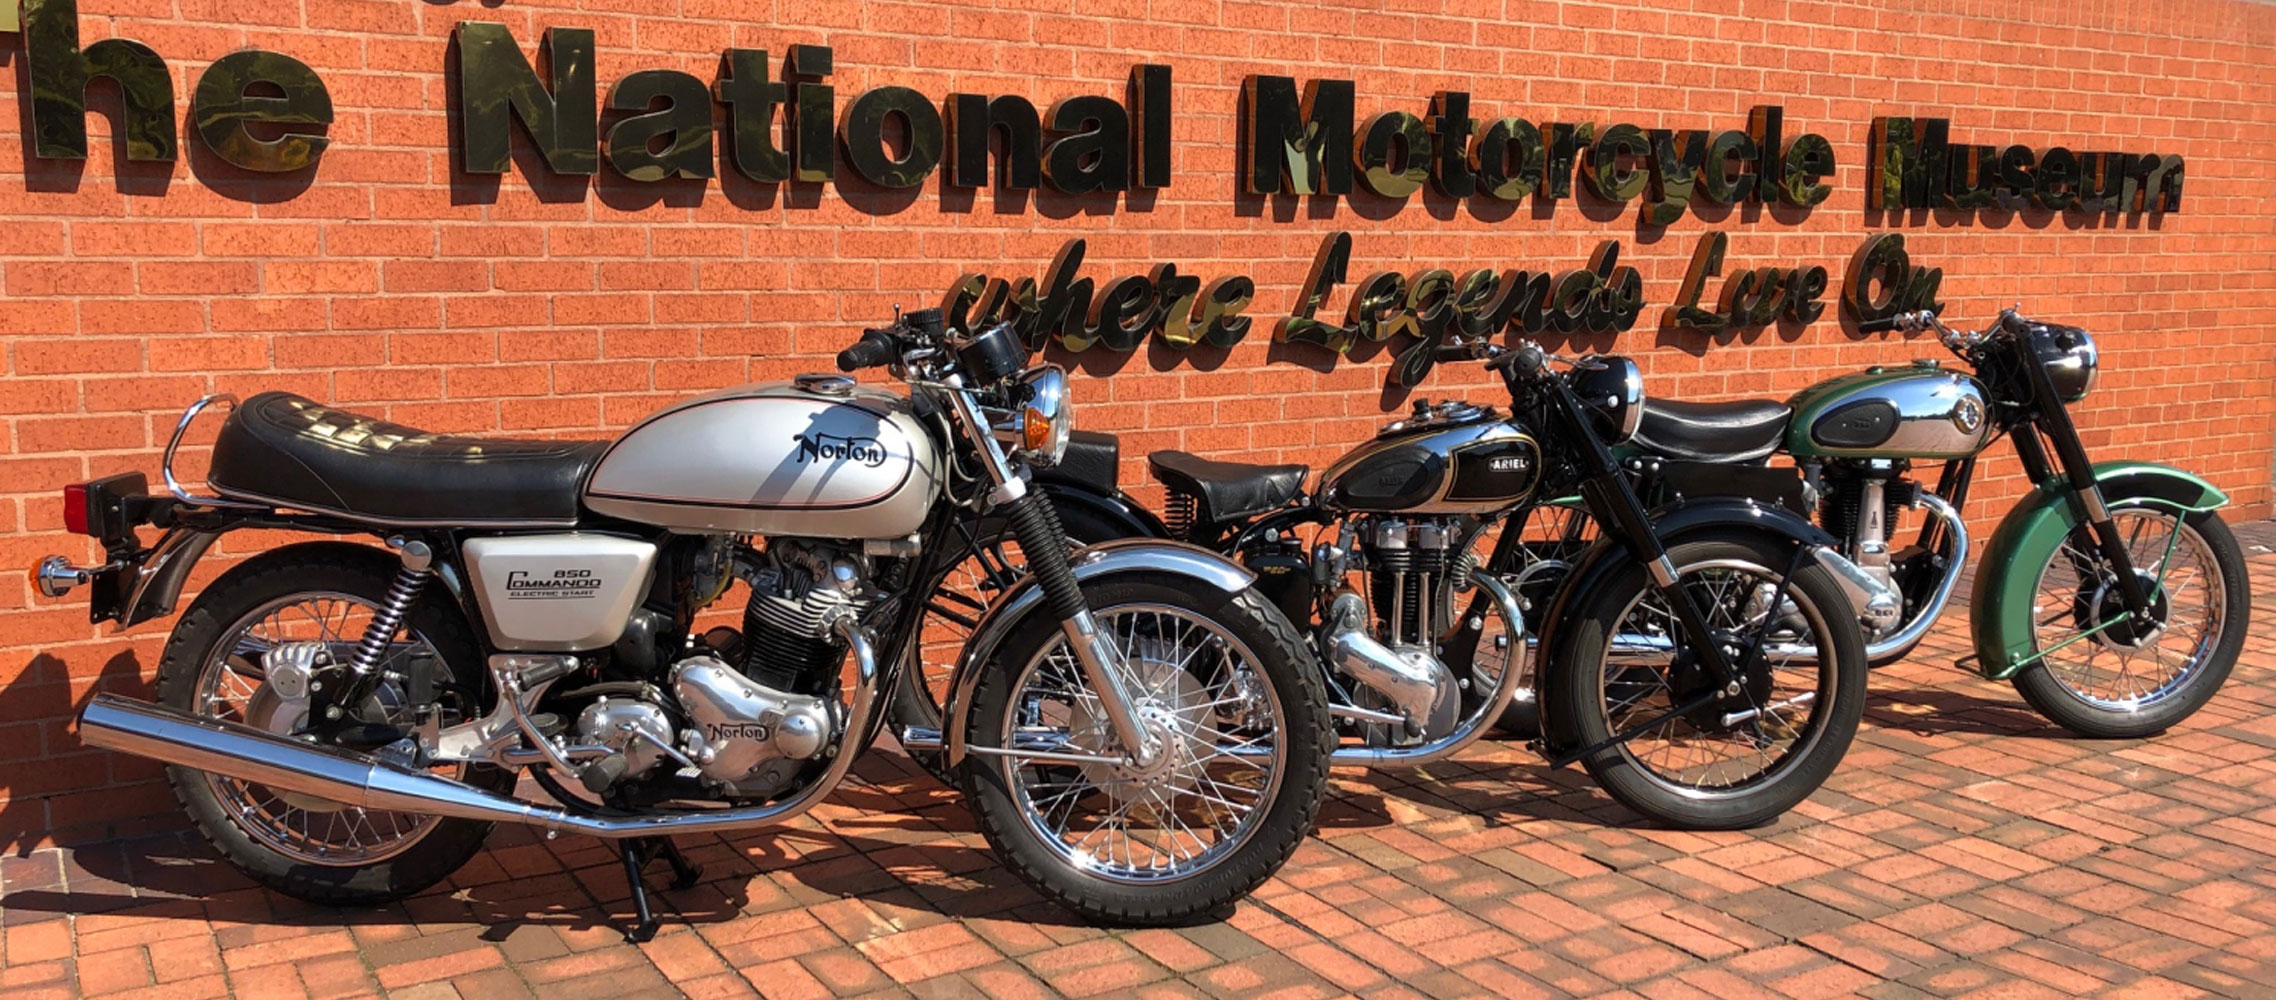 The National Motorcycle Museum Raffle – support the Lansdowne Classic sponsor